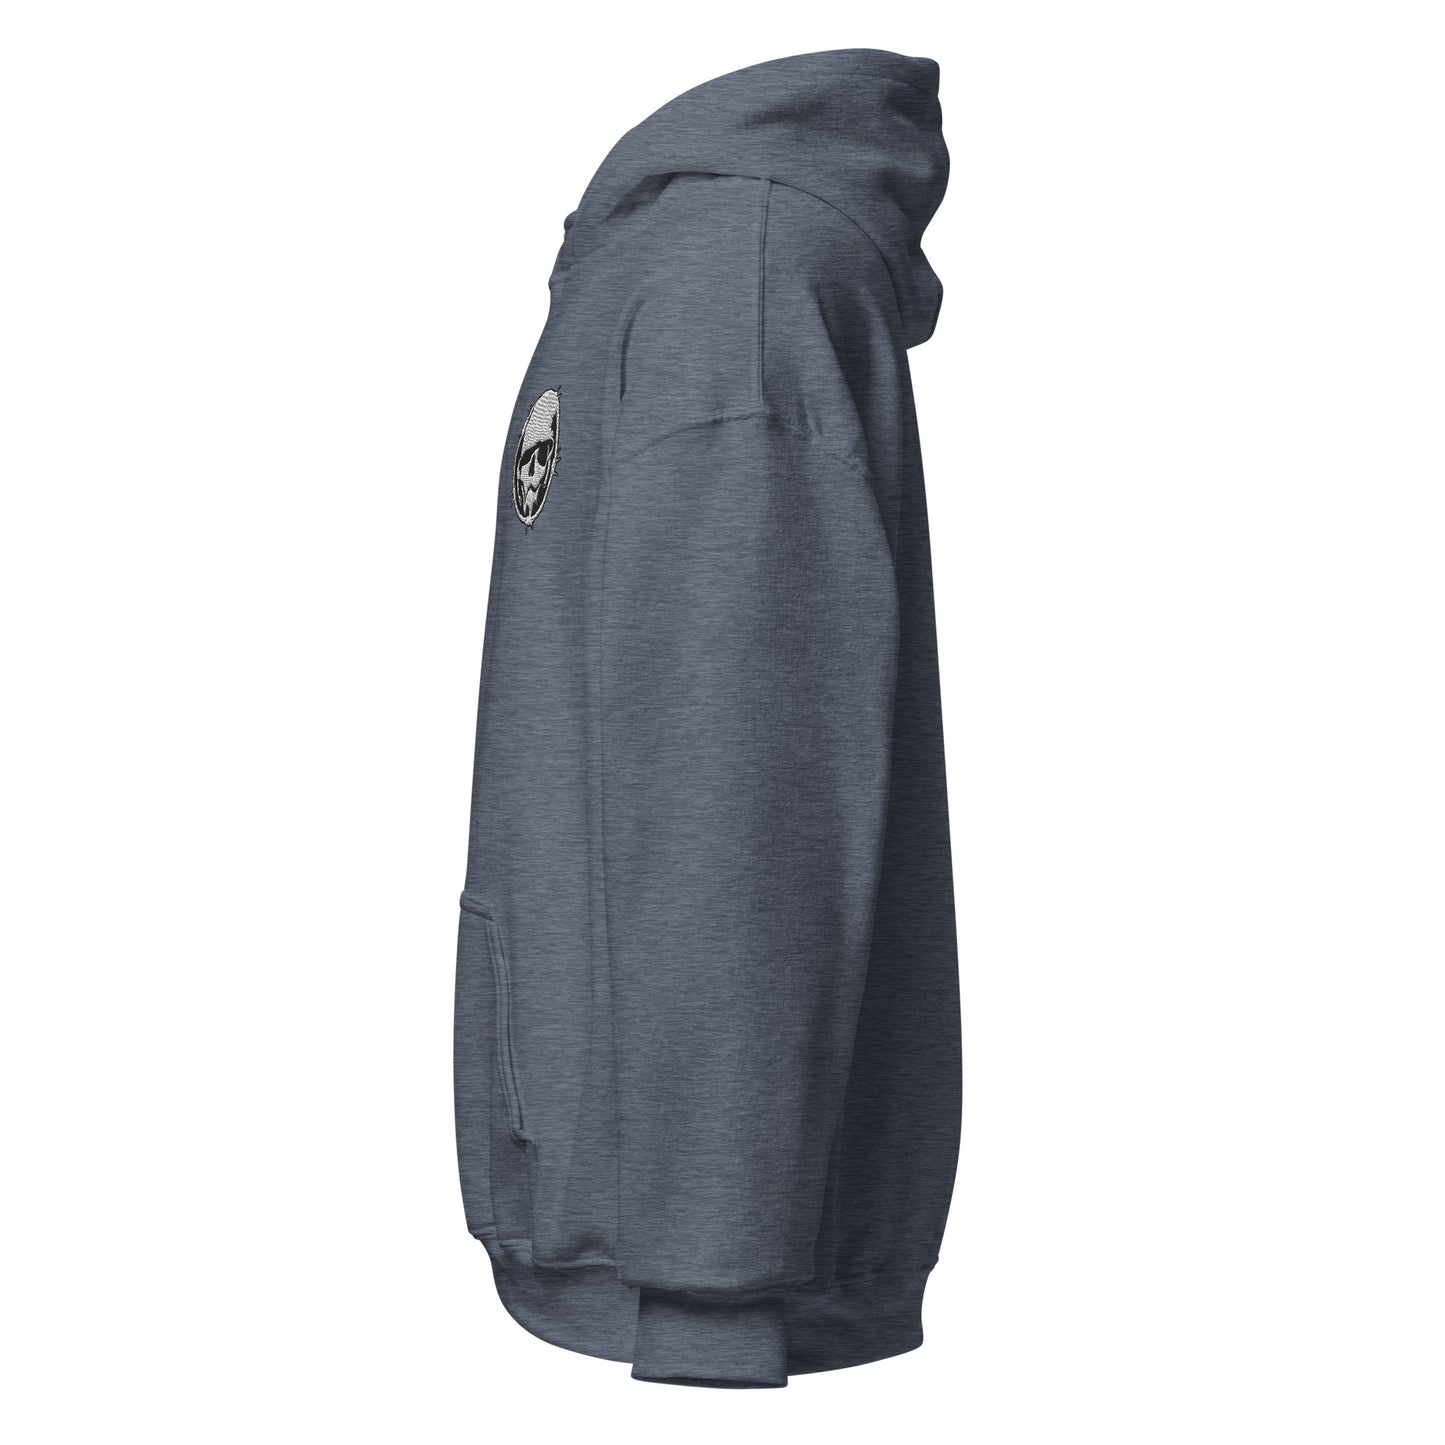 Hoodie - Combat Skully Emblem (Embroidered) - Unisex 50/50 Cotton/Poly